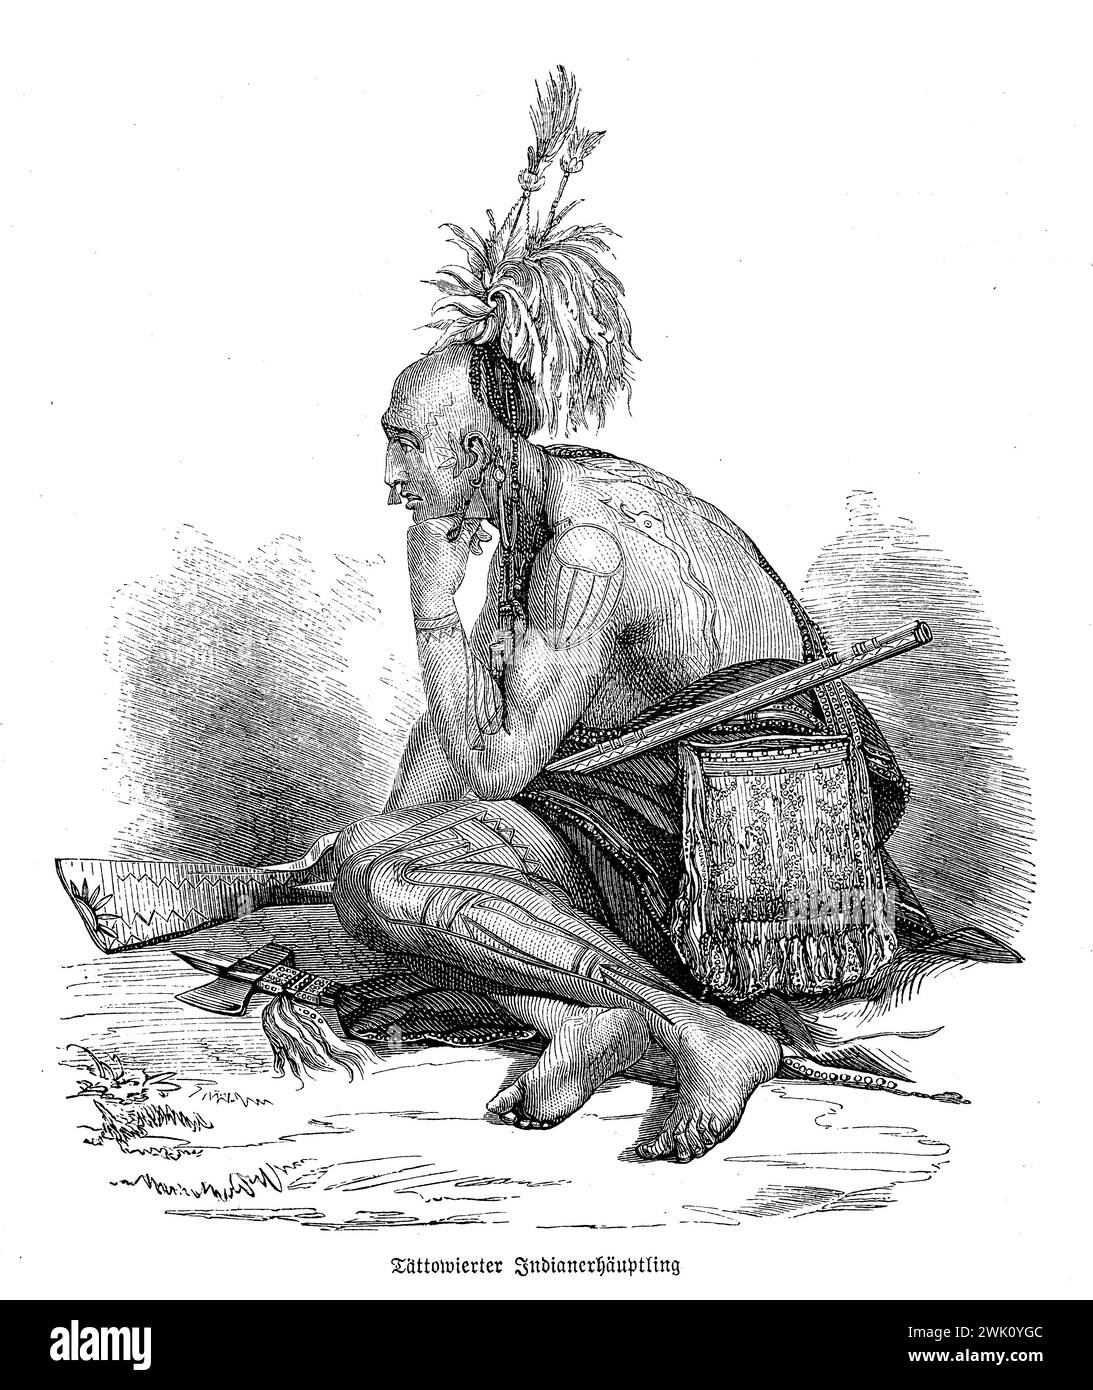 Tattoed redskin chief North America native with gun and headdressing, 19th century illustration Stock Photo